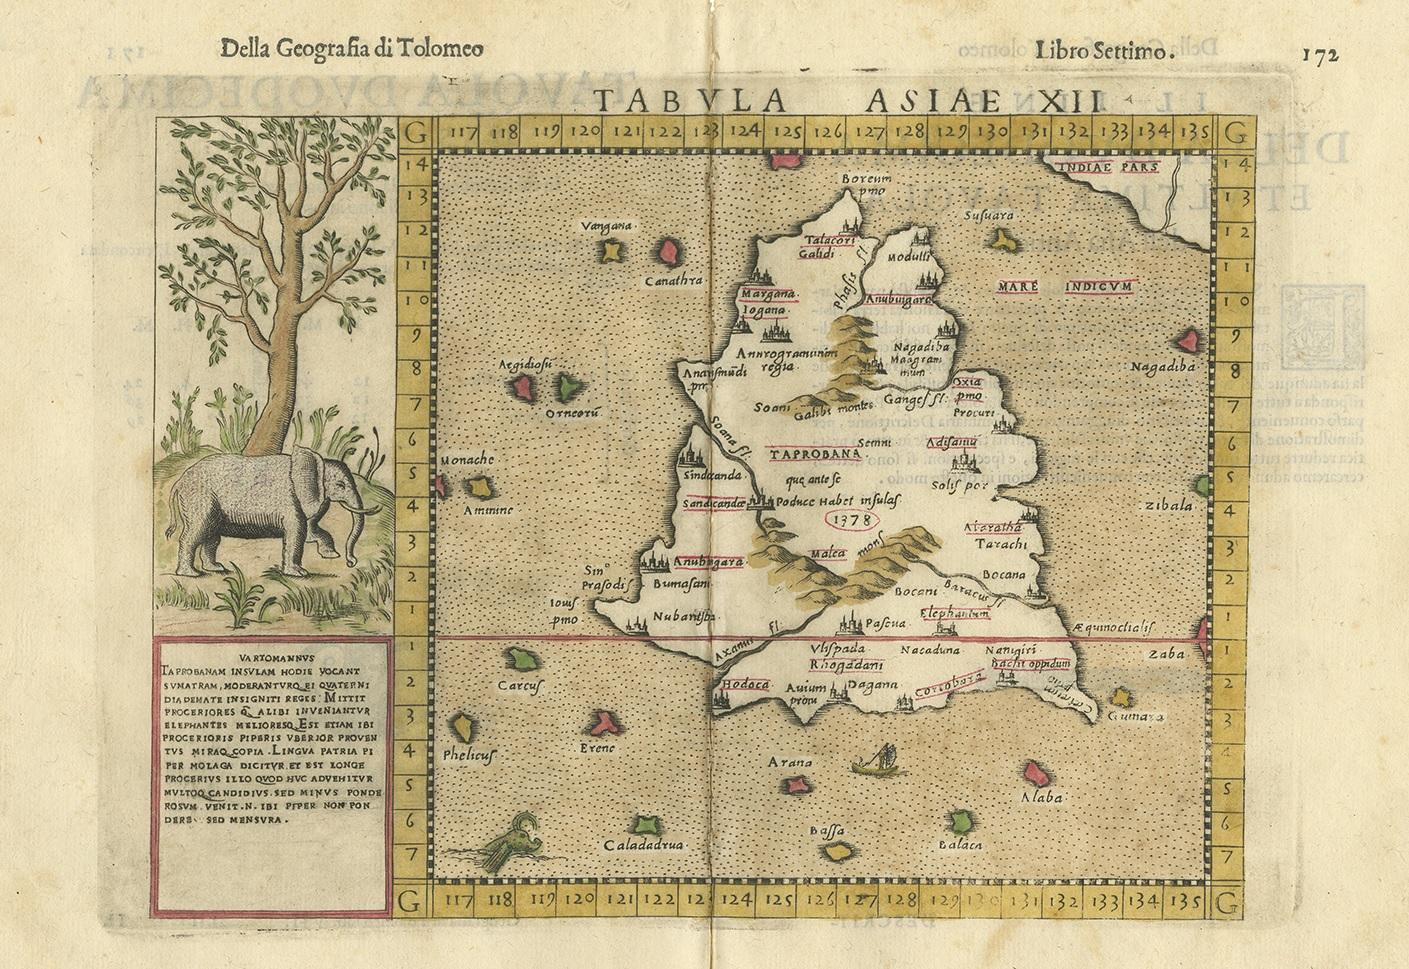 Antique map titled 'Tabula Asiae XII'. Very decorative map of Sri Lanka. In ancient times, Sri Lanka was known by various names, Ptolemy named it Taprobana, the Arabs Serendib, the Portuguese called it Ceilo and the British, Ceylon. This map also